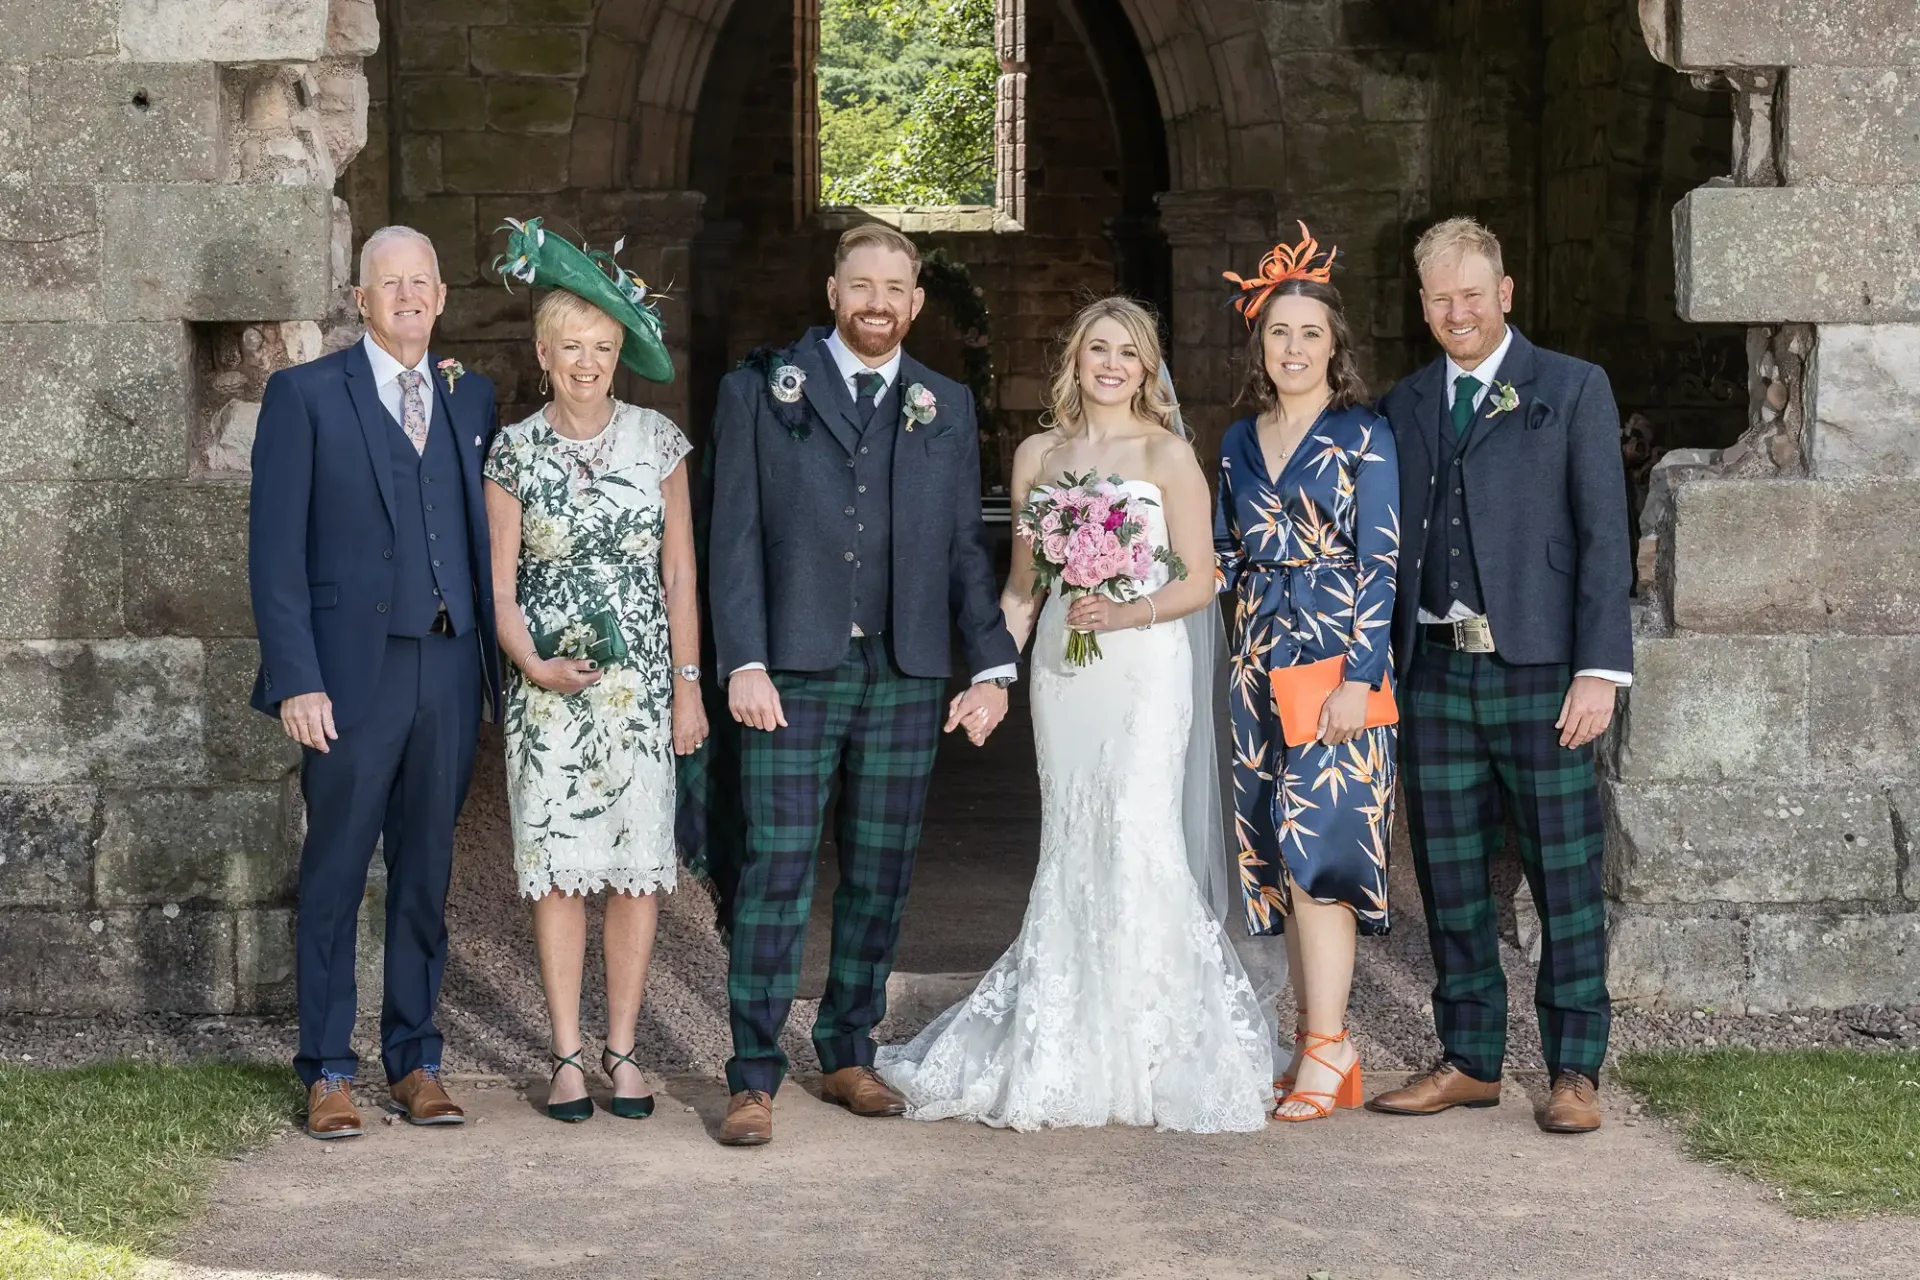 A wedding group photo featuring a newlywed couple with four guests, all smiling, in formal attire with tartan patterns, standing by stone ruins under a clear sky.